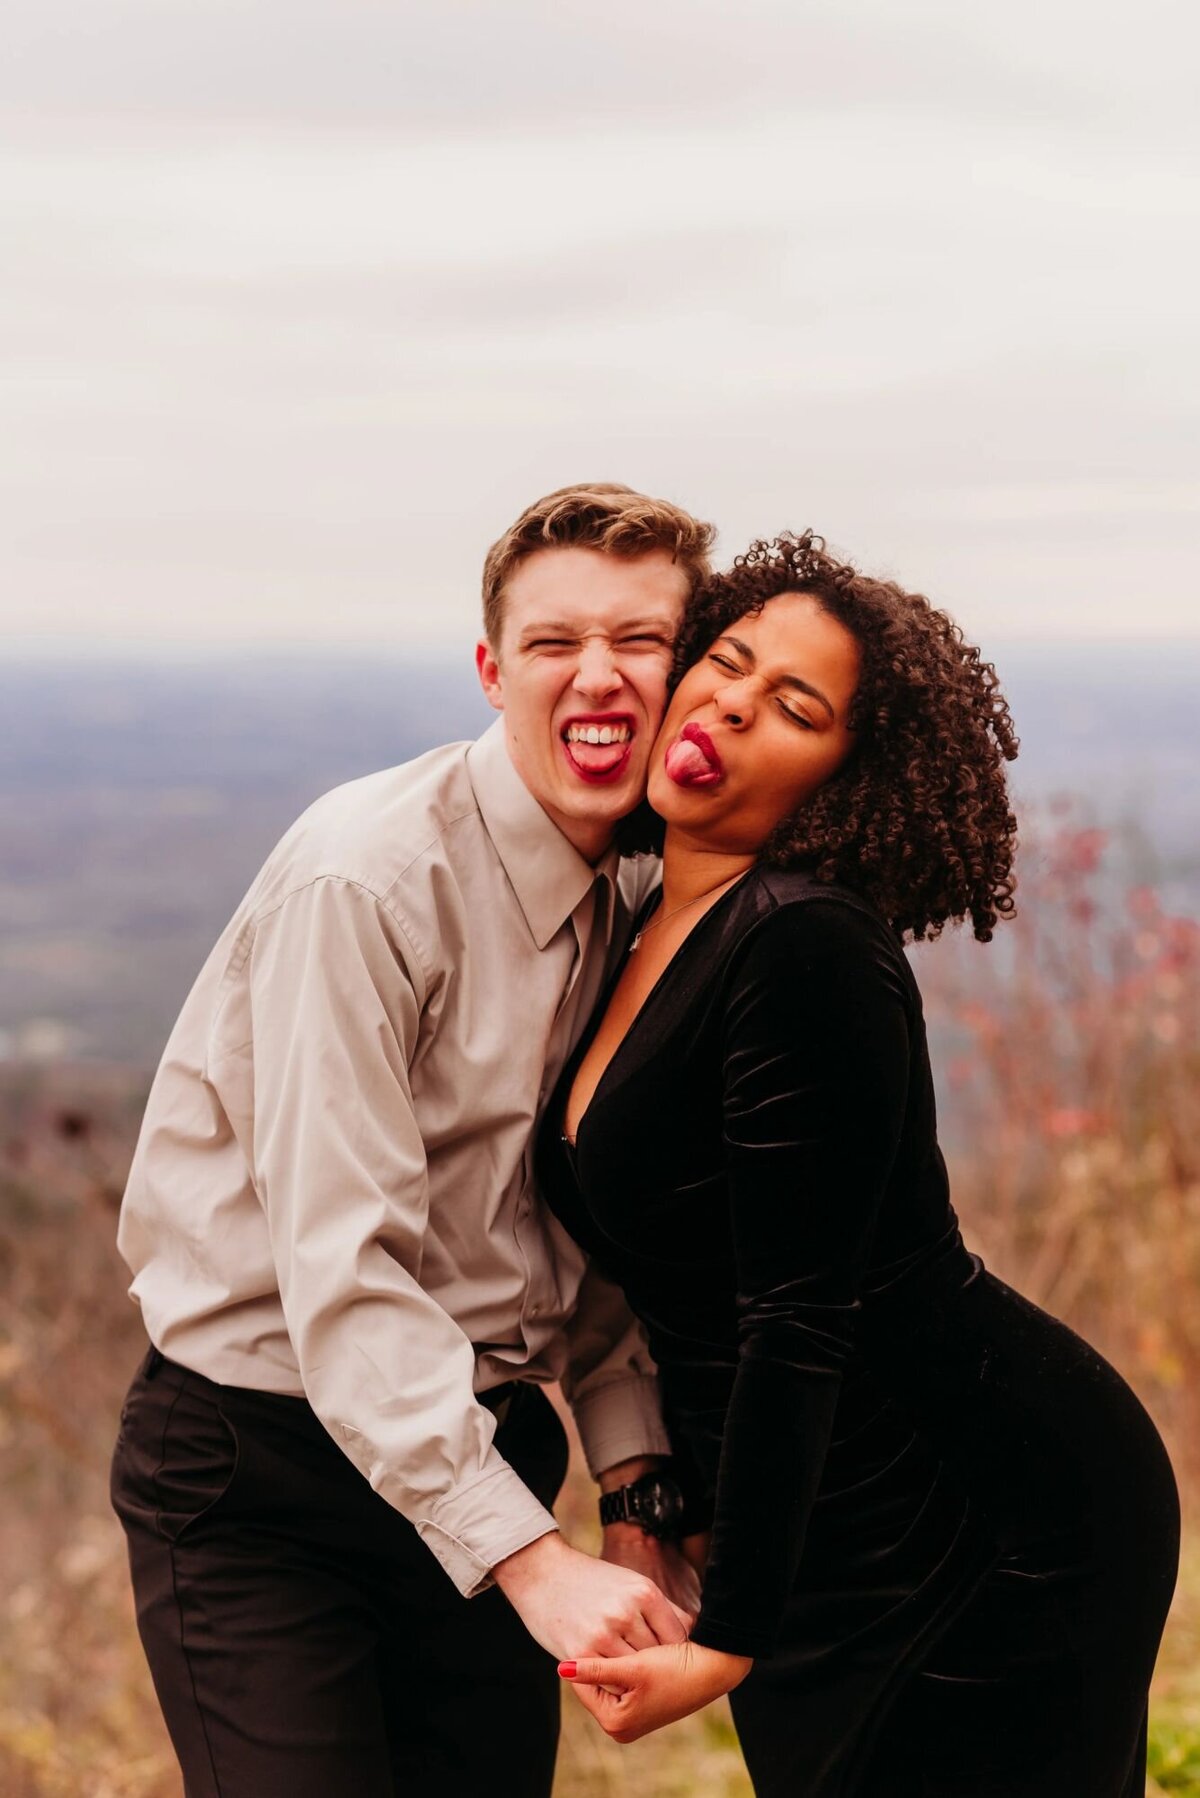 photo of man and woman making silly faces together